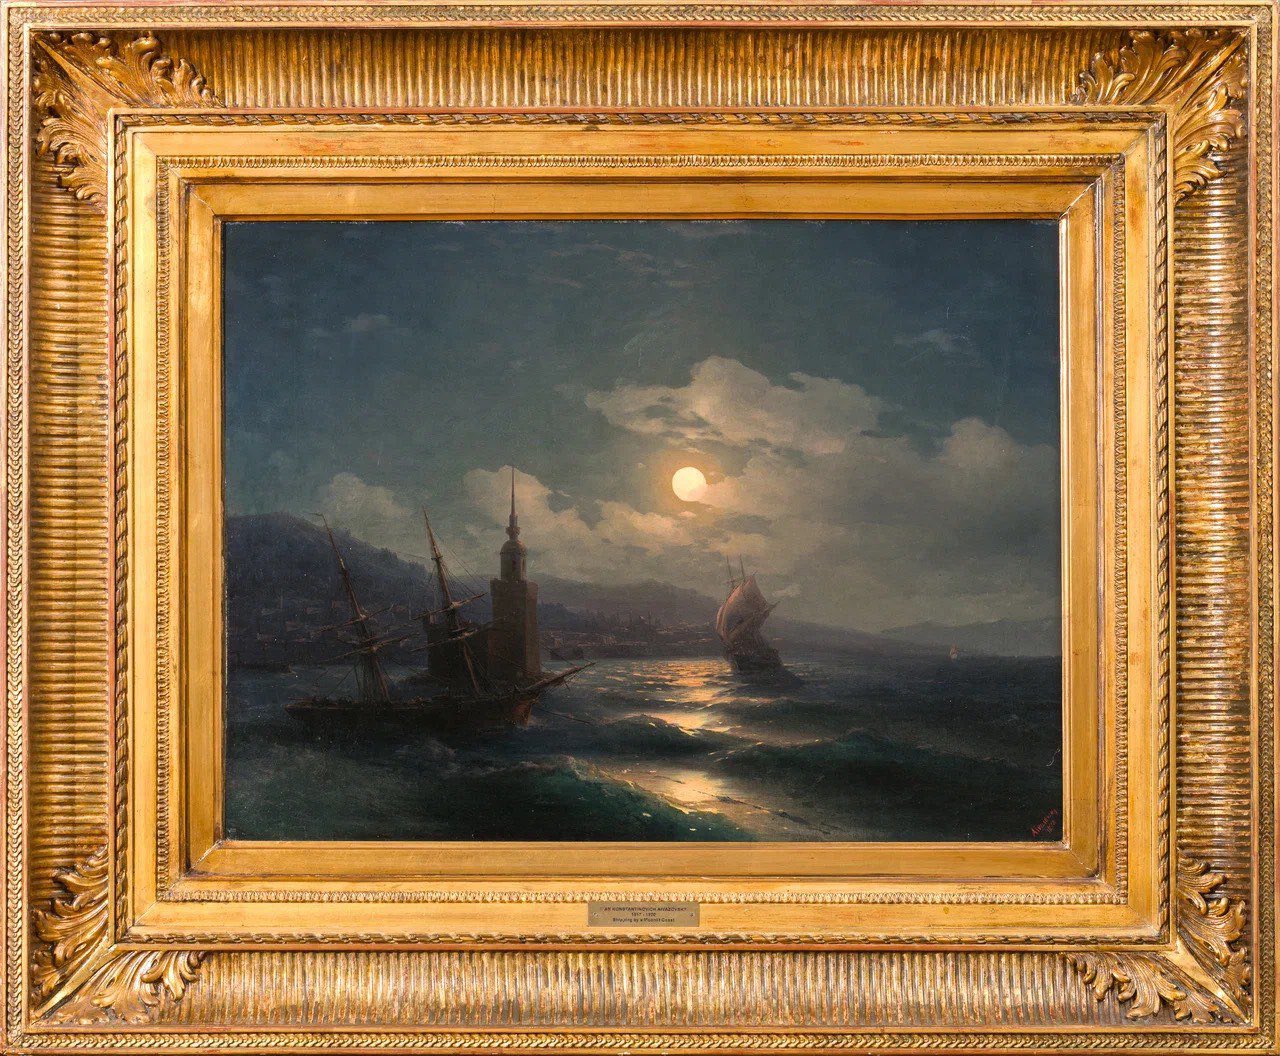 Russia wants to sell the painting by Ivan Aivazovsky, which was stolen from the Mariupol Local History Museum